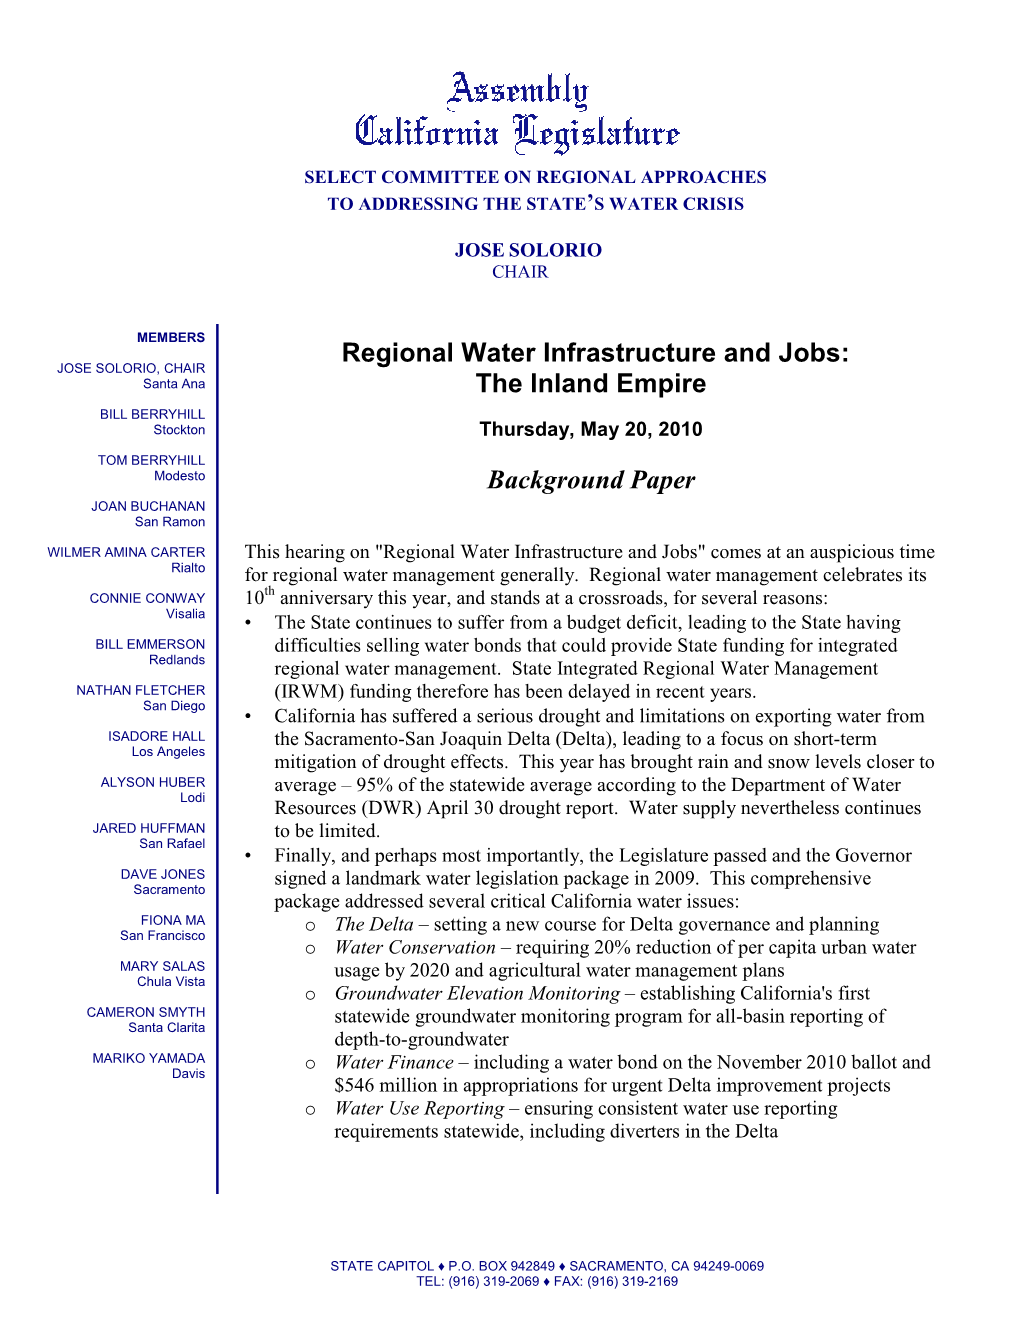 Regional Water Infrastructure and Jobs: the Inland Empire